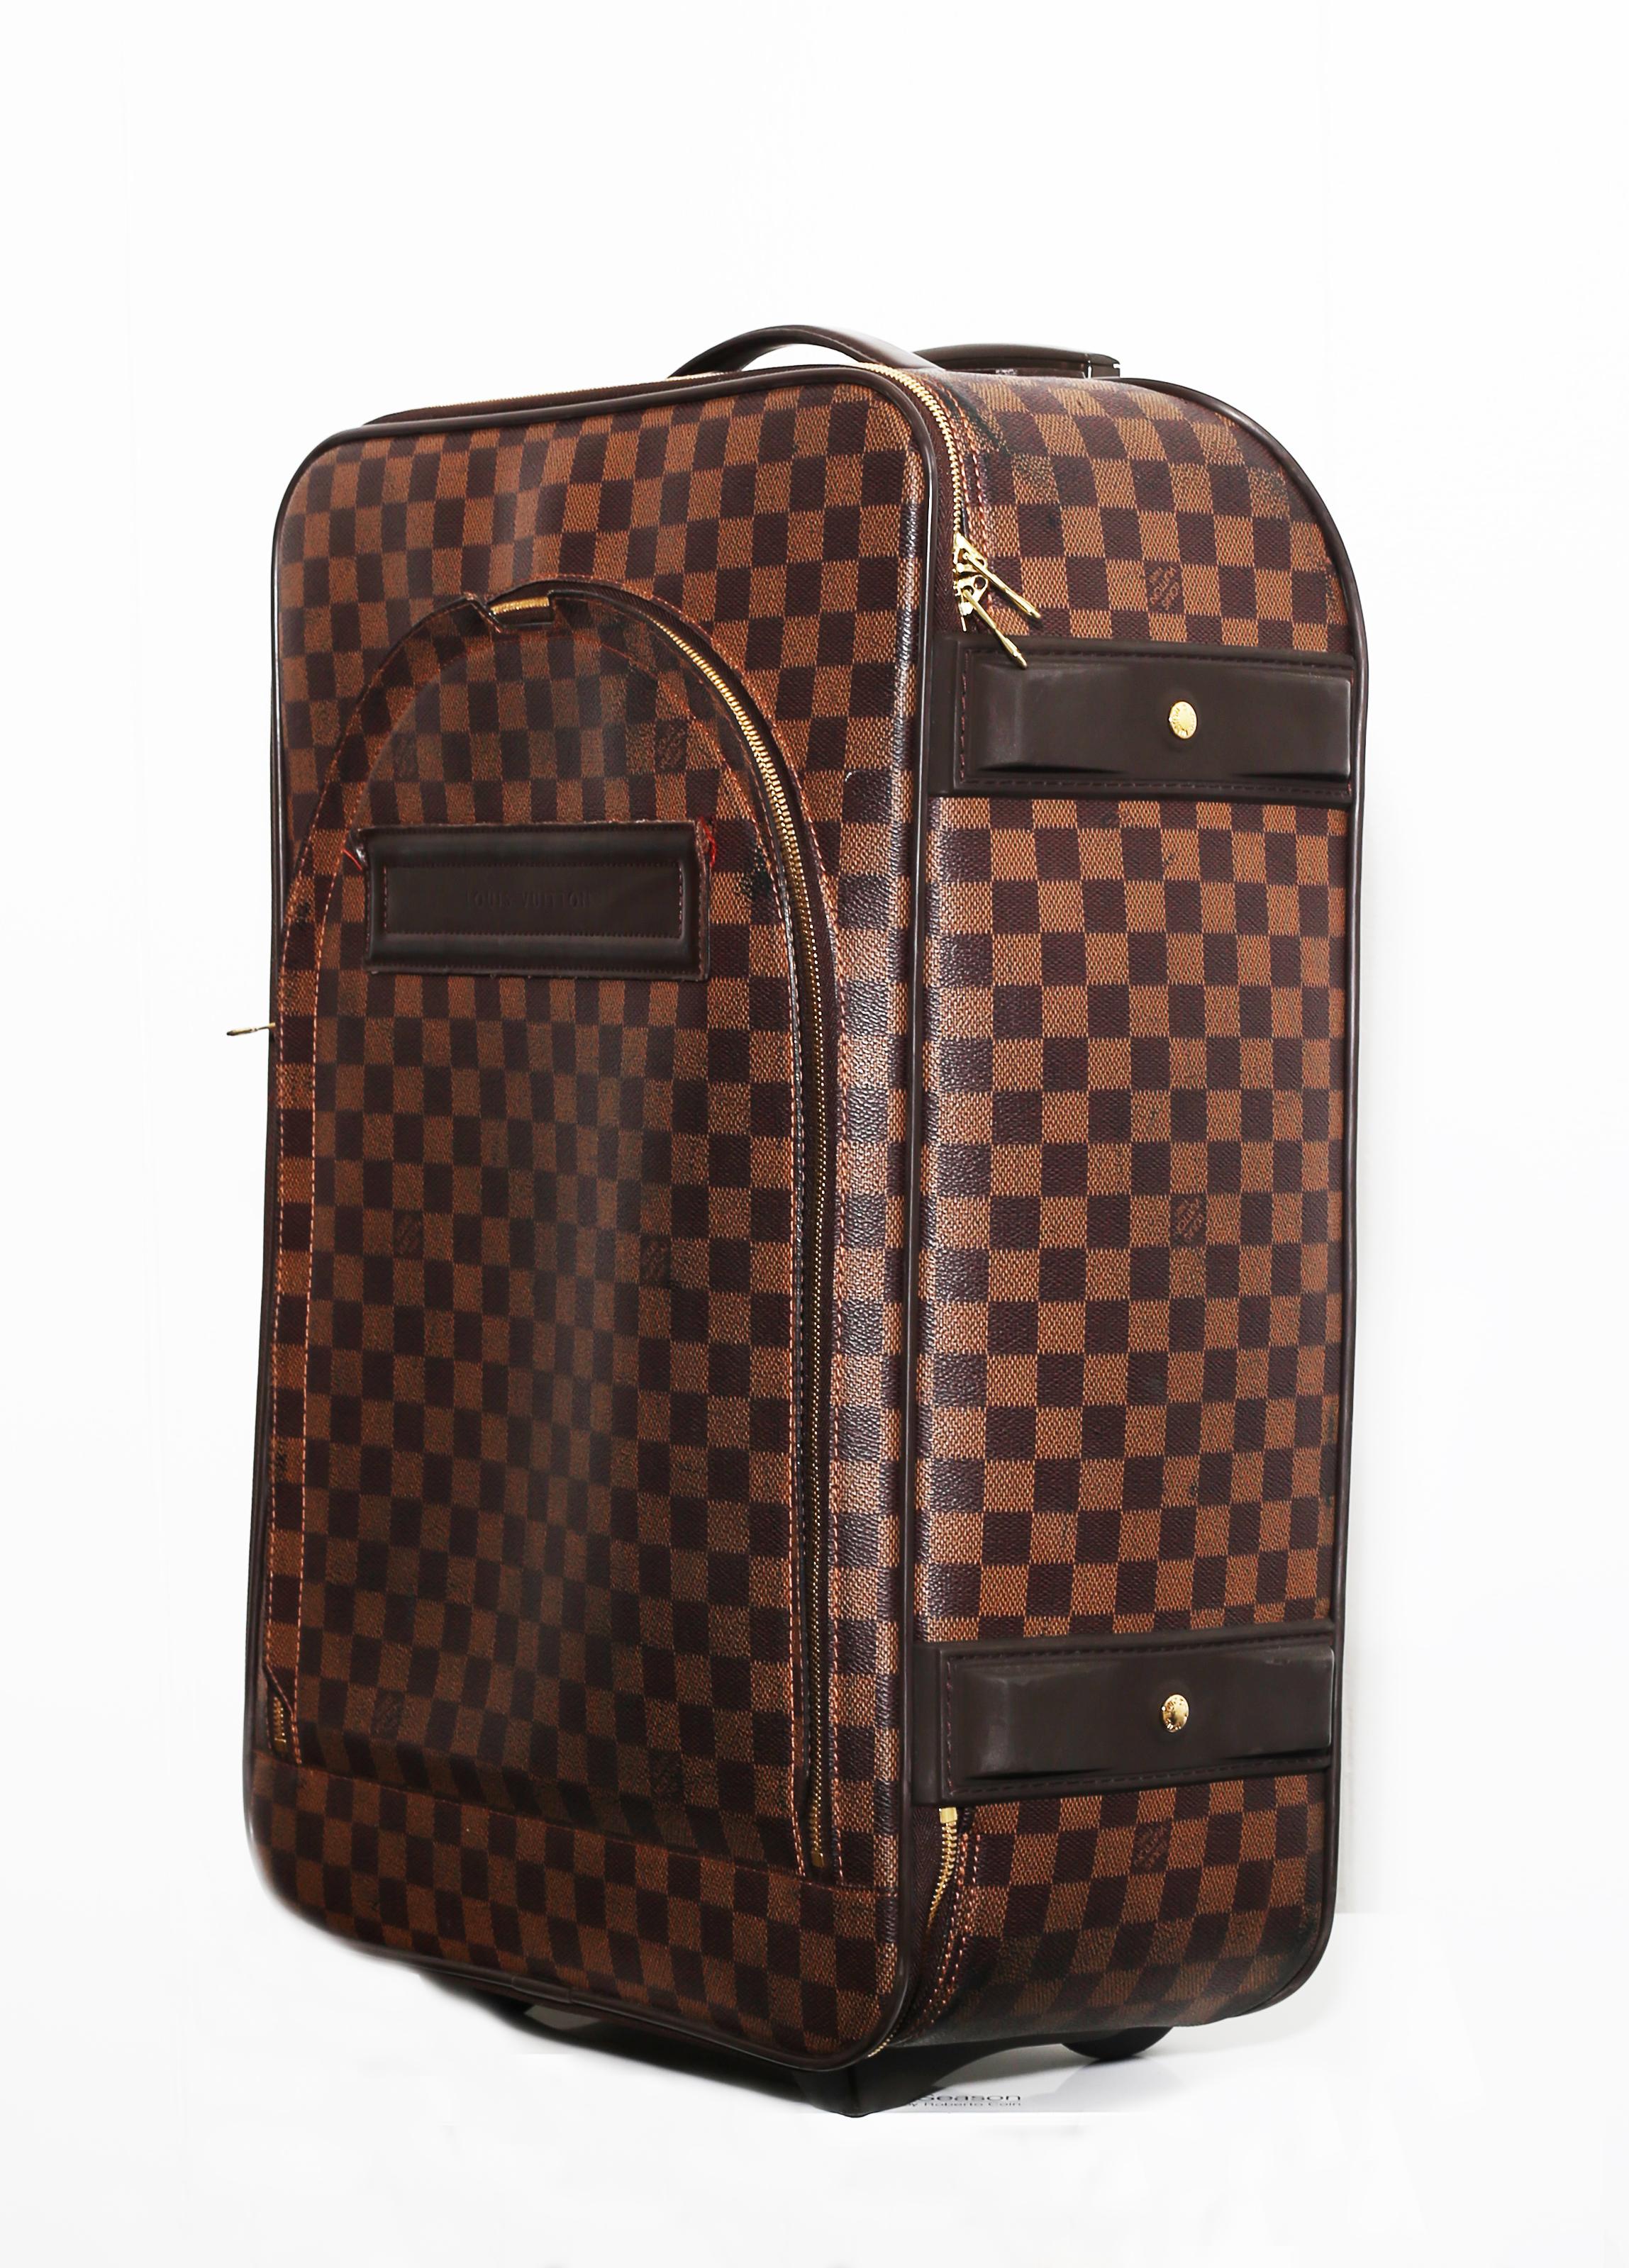 Louis Vuitton Damier Pégase 55 Travel Luggage
An elegant silhouette defines the Pégase Légère 50, a piece of luggage inspired by the iconic Pégase.
Light and luxurious, This timeless travelcase has 2 exterior pocket: 1 open and 1 with zipper.
Double